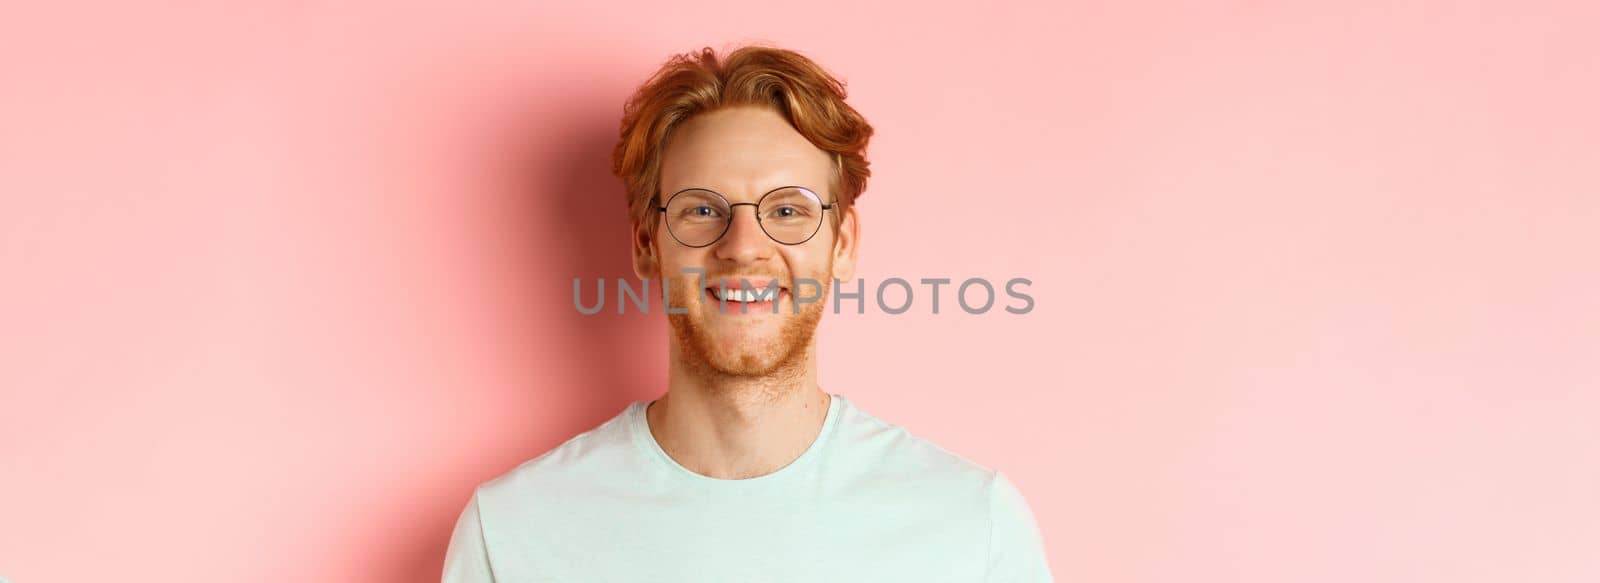 Close up of happy redhead man face, smiling with white teeth at camera, wearing glasses for better sight and t-shirt, standing over pink background.